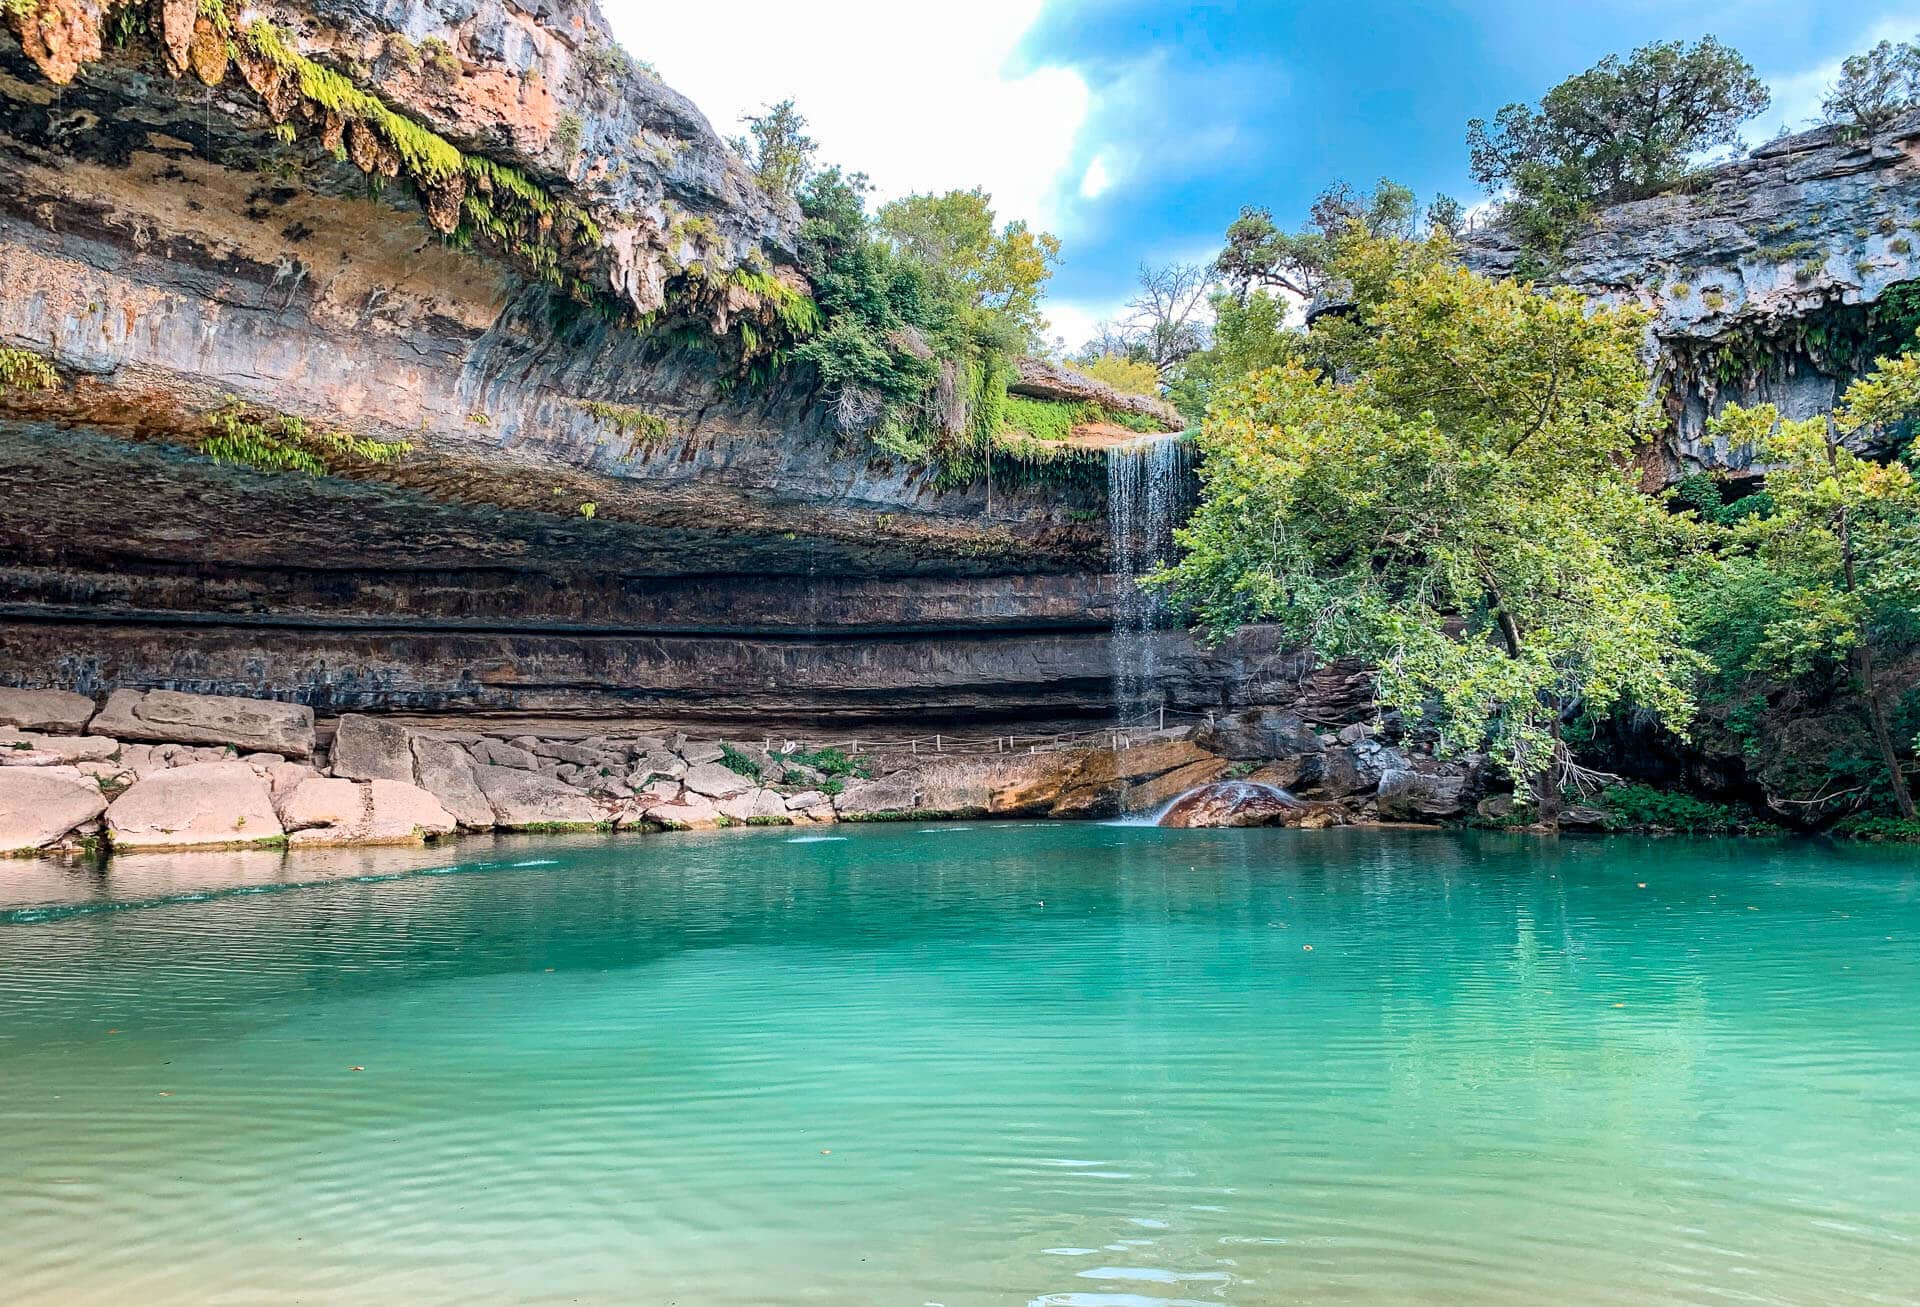 Epic Texas Hill Country Road Trip – A Complete Guide and Itinerary